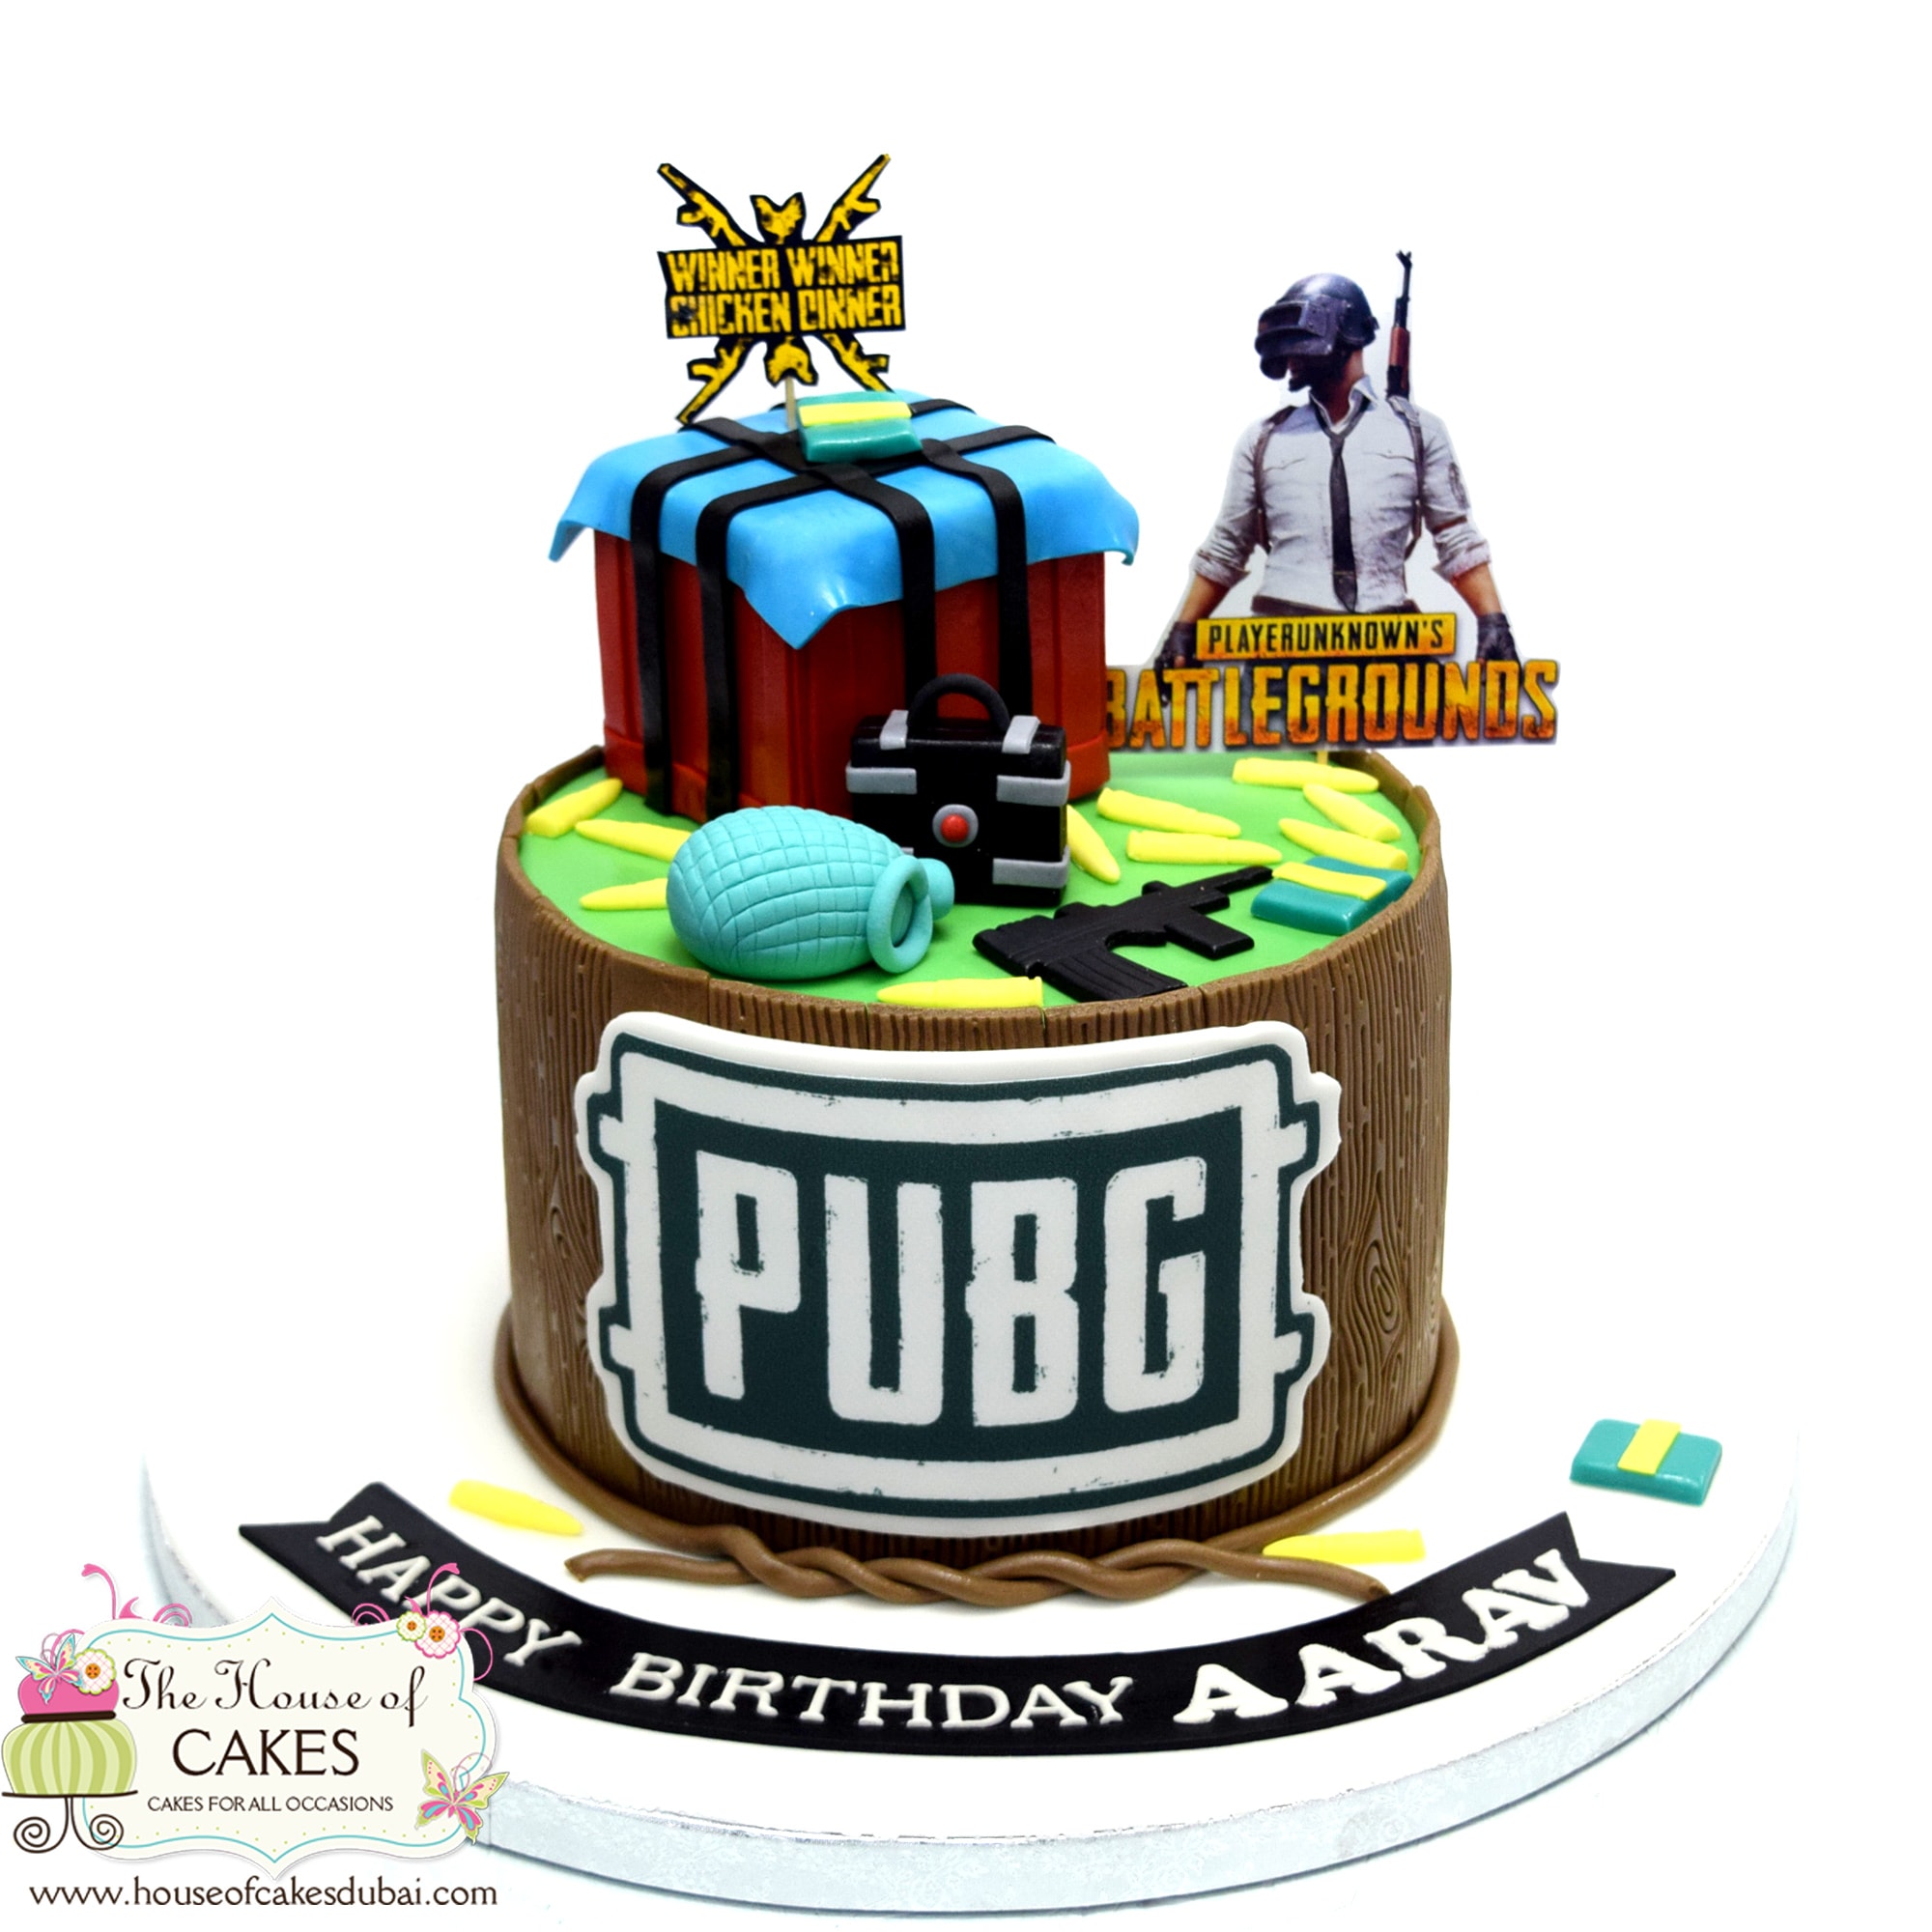 Pubg Theme Cake near Ritchie Road - Cakes and Bakes Stories